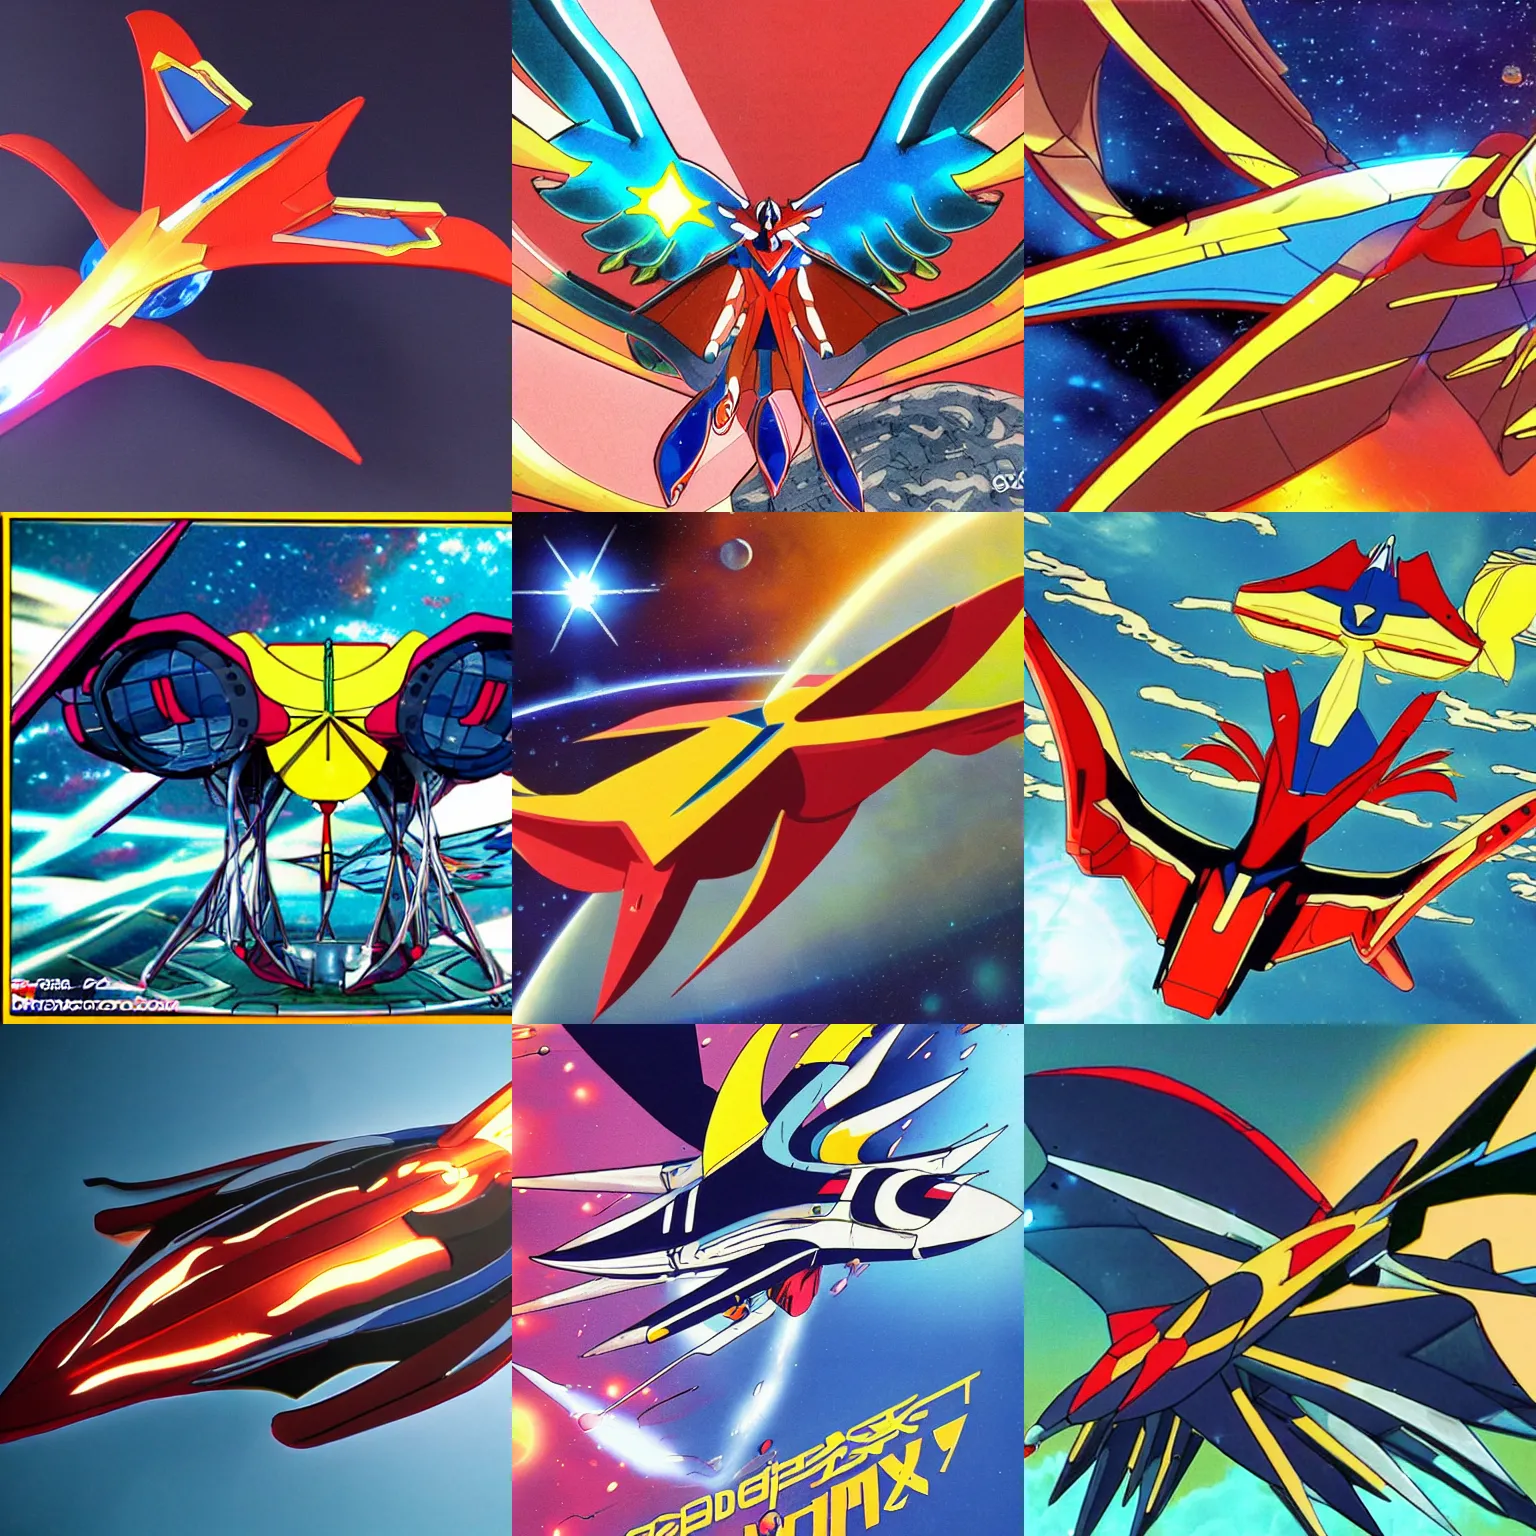 Prompt: god phoenix space ship from gatchaman 科 学 忍 者 隊 カッチャマン